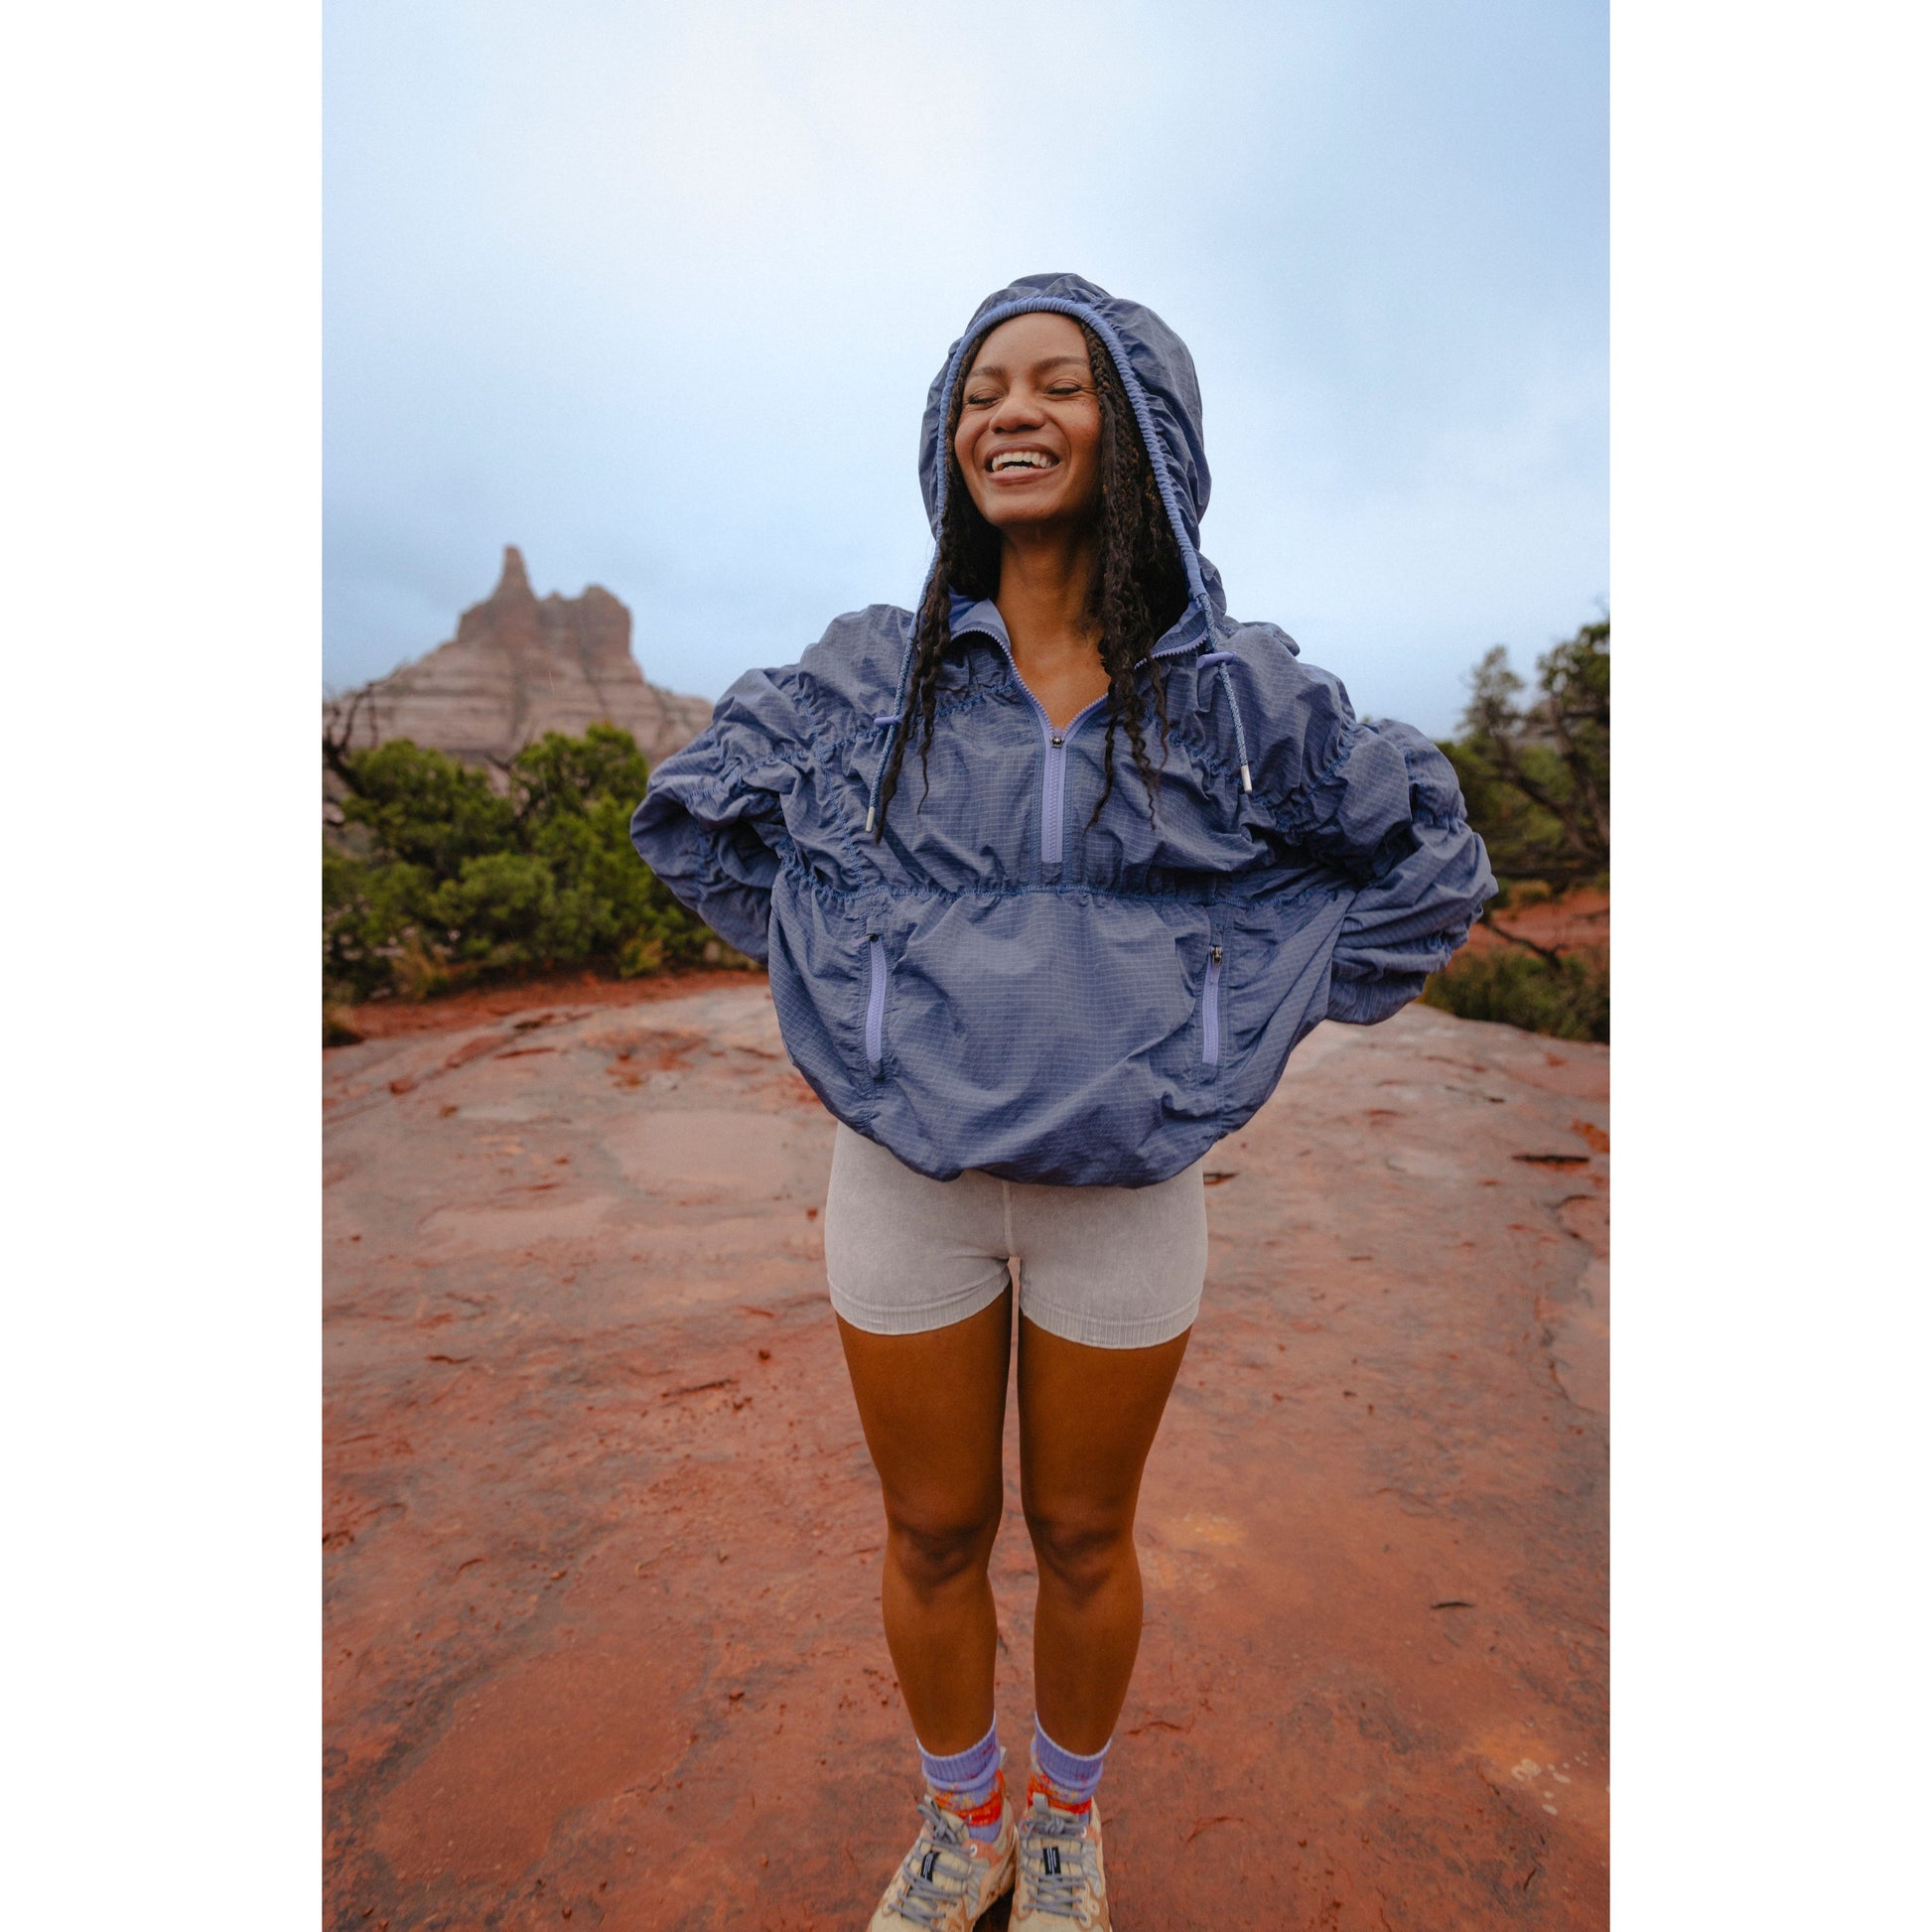 A joyful woman in a Happy Camper Pullover by Free People Movement, Twilight Violet color, stands on a red rocky terrain with a hood on her head, smiling under a cloudy sky.